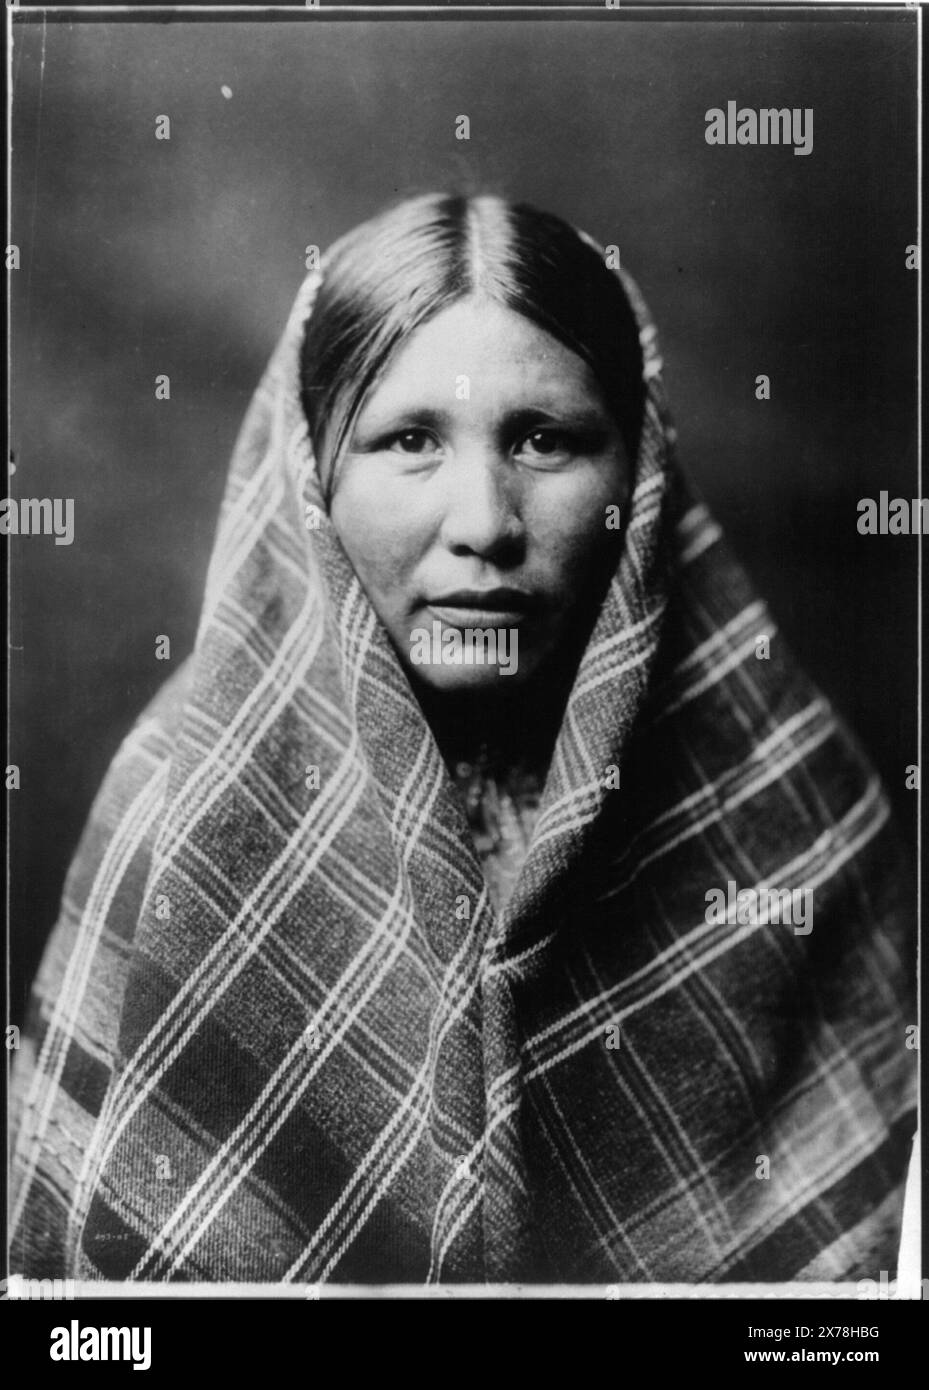 Nespilim woman, Curtis no. 273-05., LC no. 65., Forms part of: Edward S. Curtis Collection ., Published in: The North American Indian / Edward S. Curtis. [Seattle, Wash.] : Edward S. Curtis, 1907-30, Suppl. v. 7, pl. 245., WSUNA. Indians of North America, Women, 1900-1910. , Nespelim Indians, Women, 1900-1910. Stock Photo